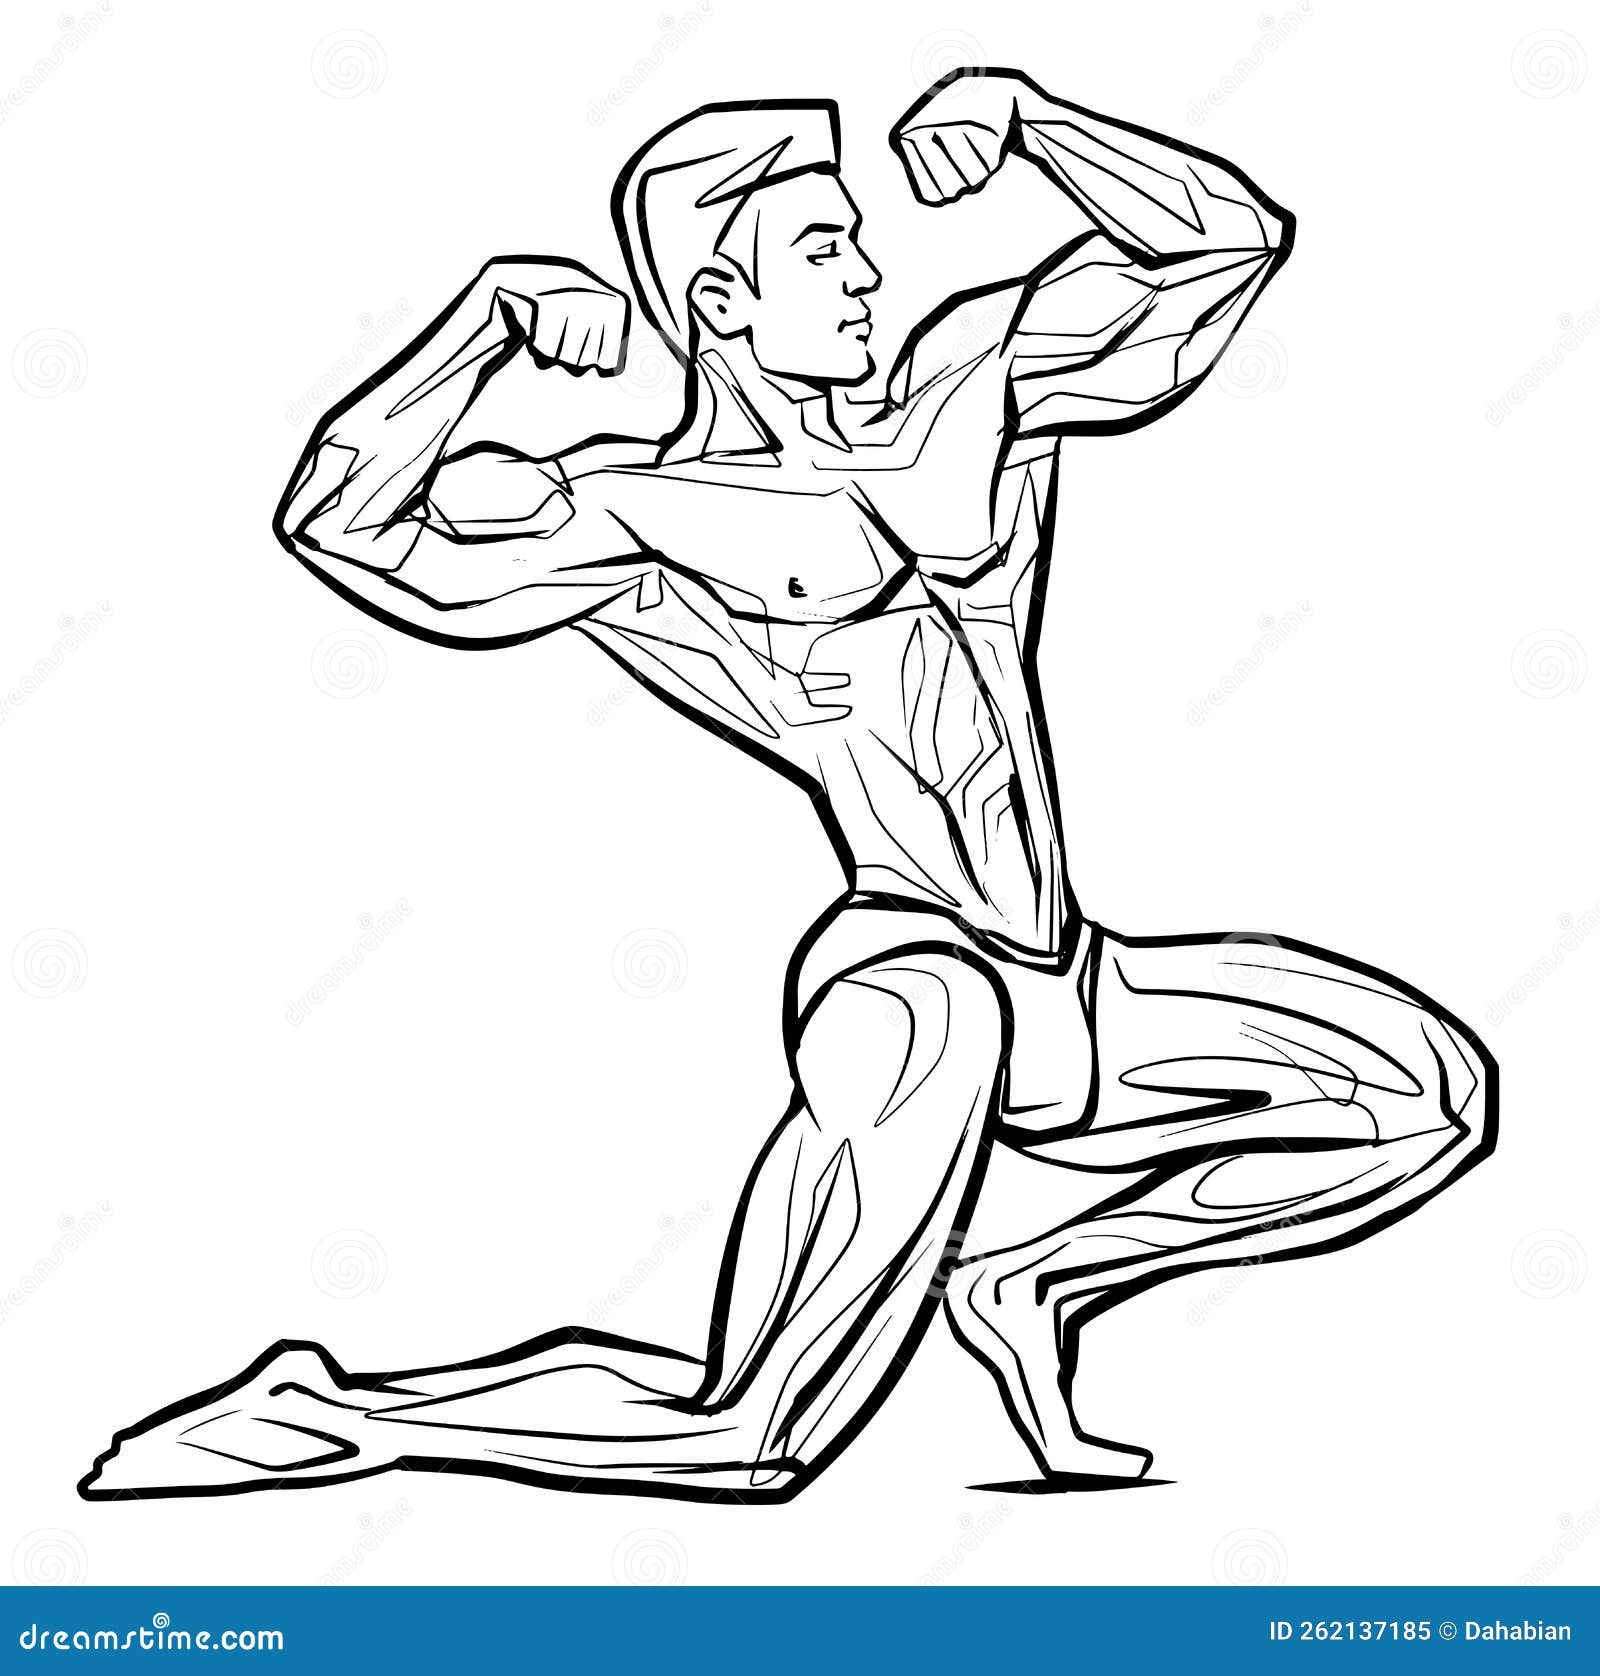 Day 19 of learning anatomy. Did a few bodybuilding poses. Should I continue  with these extreme bodies or switch to more regular bodies? : r/learntodraw